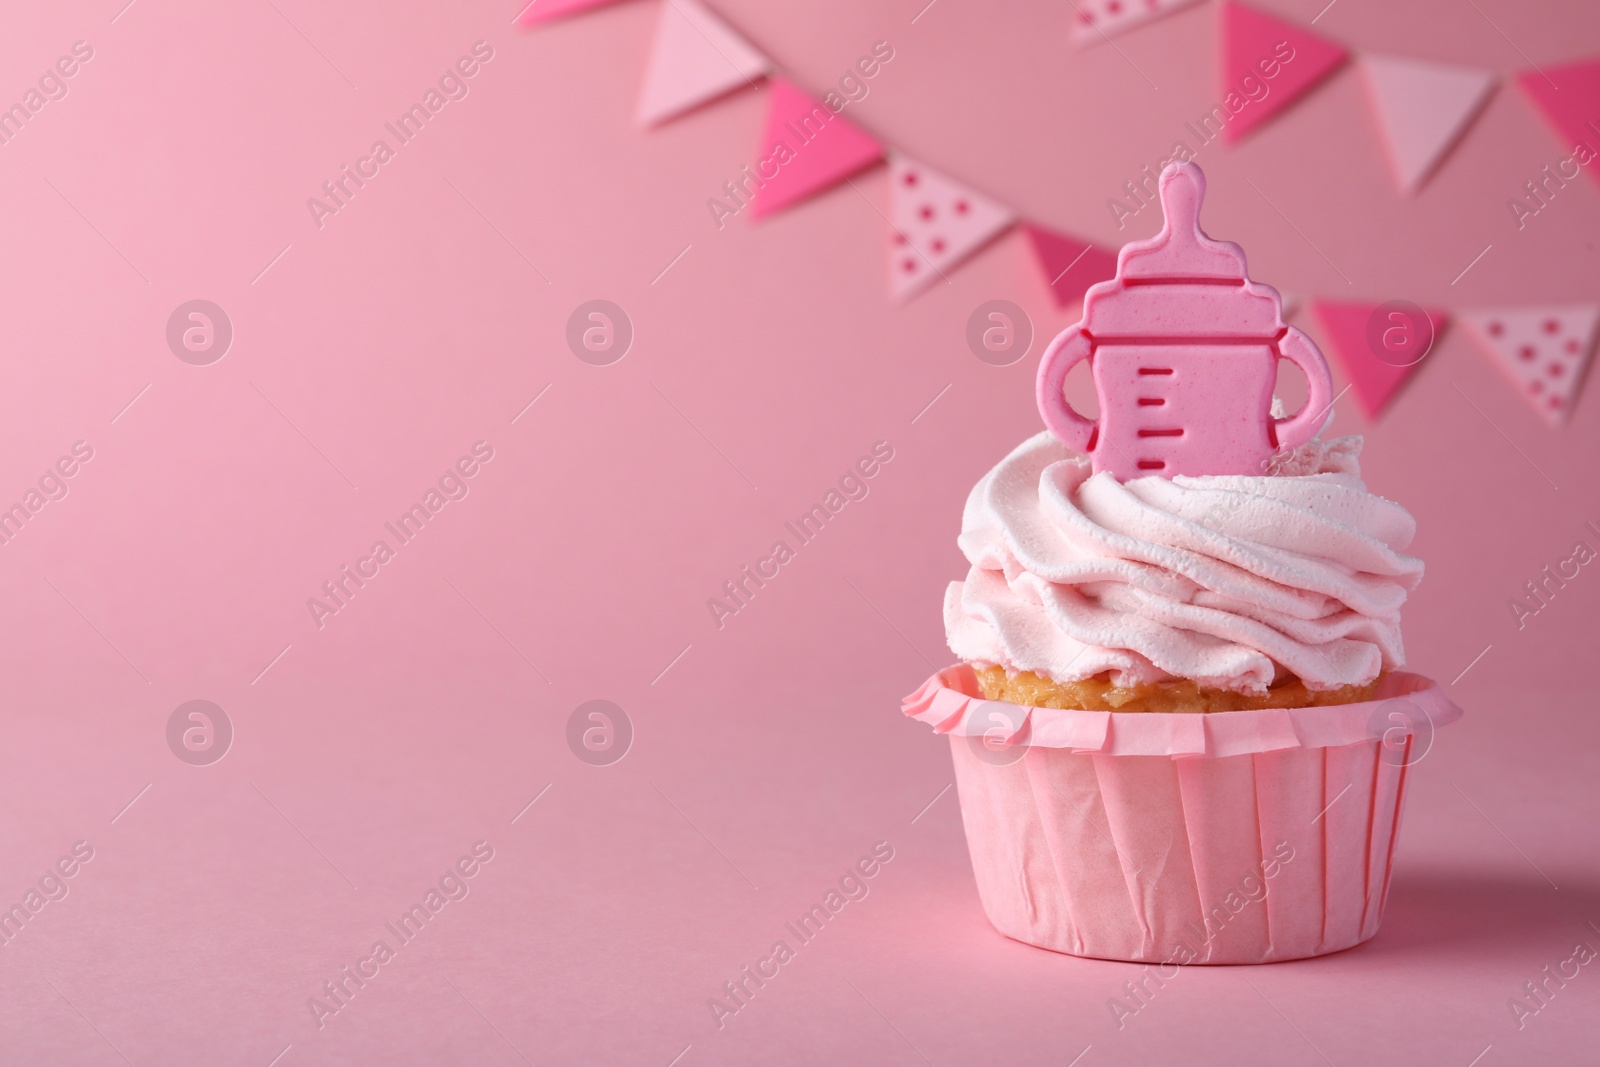 Photo of Beautifully decorated baby shower cupcake with cream and girl topper on pink background. Space for text